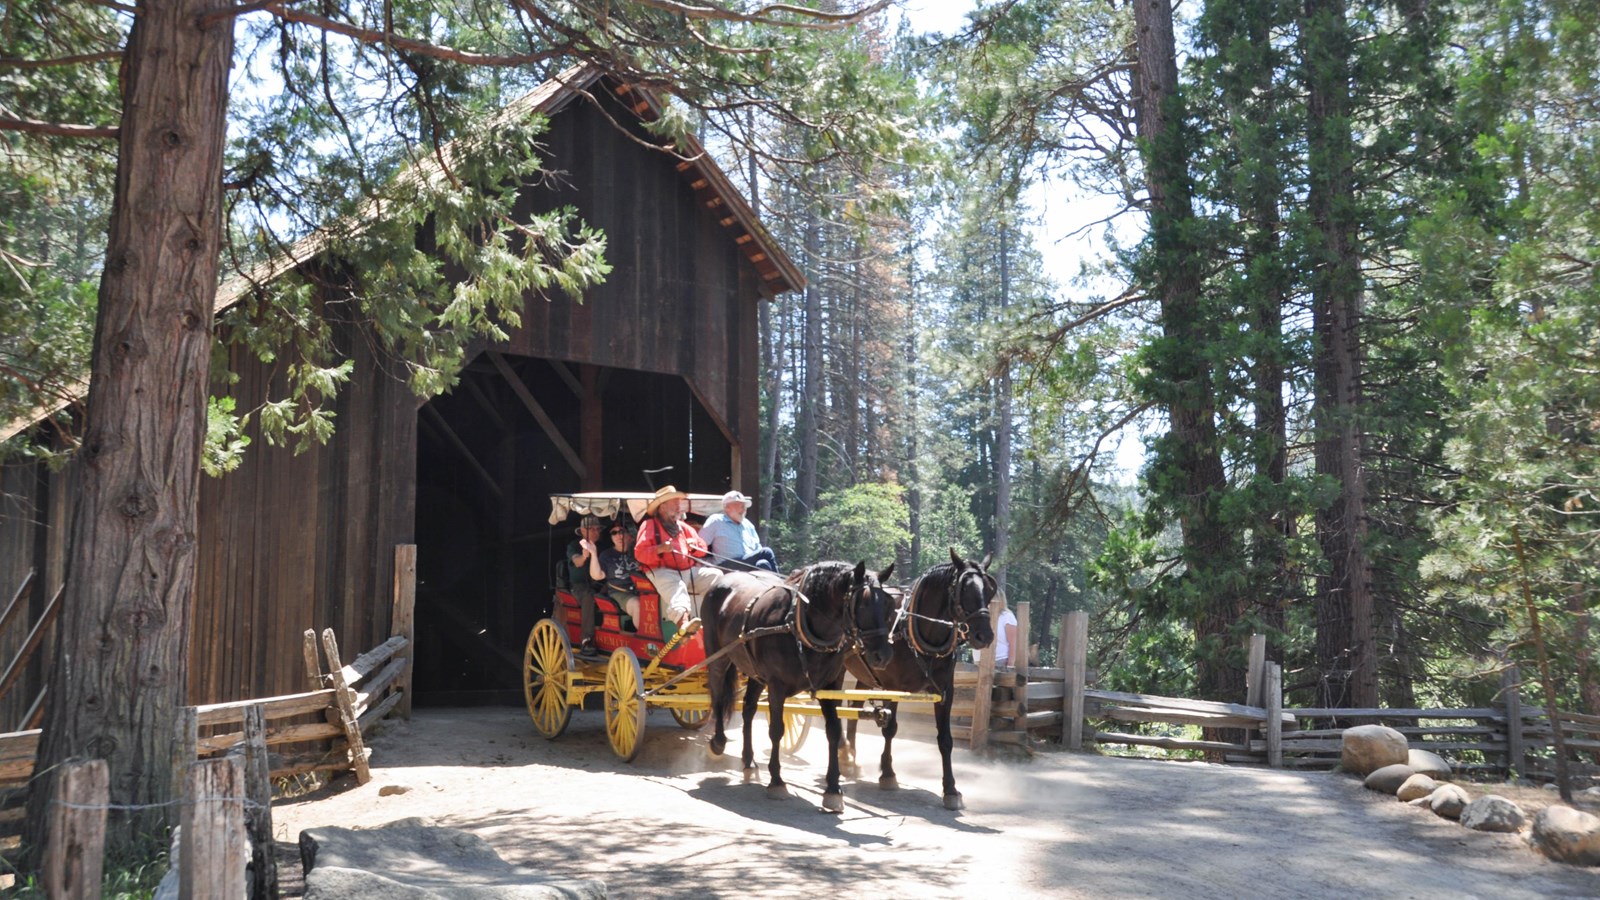 Horse drawn stage coming through covered bridge with passengers